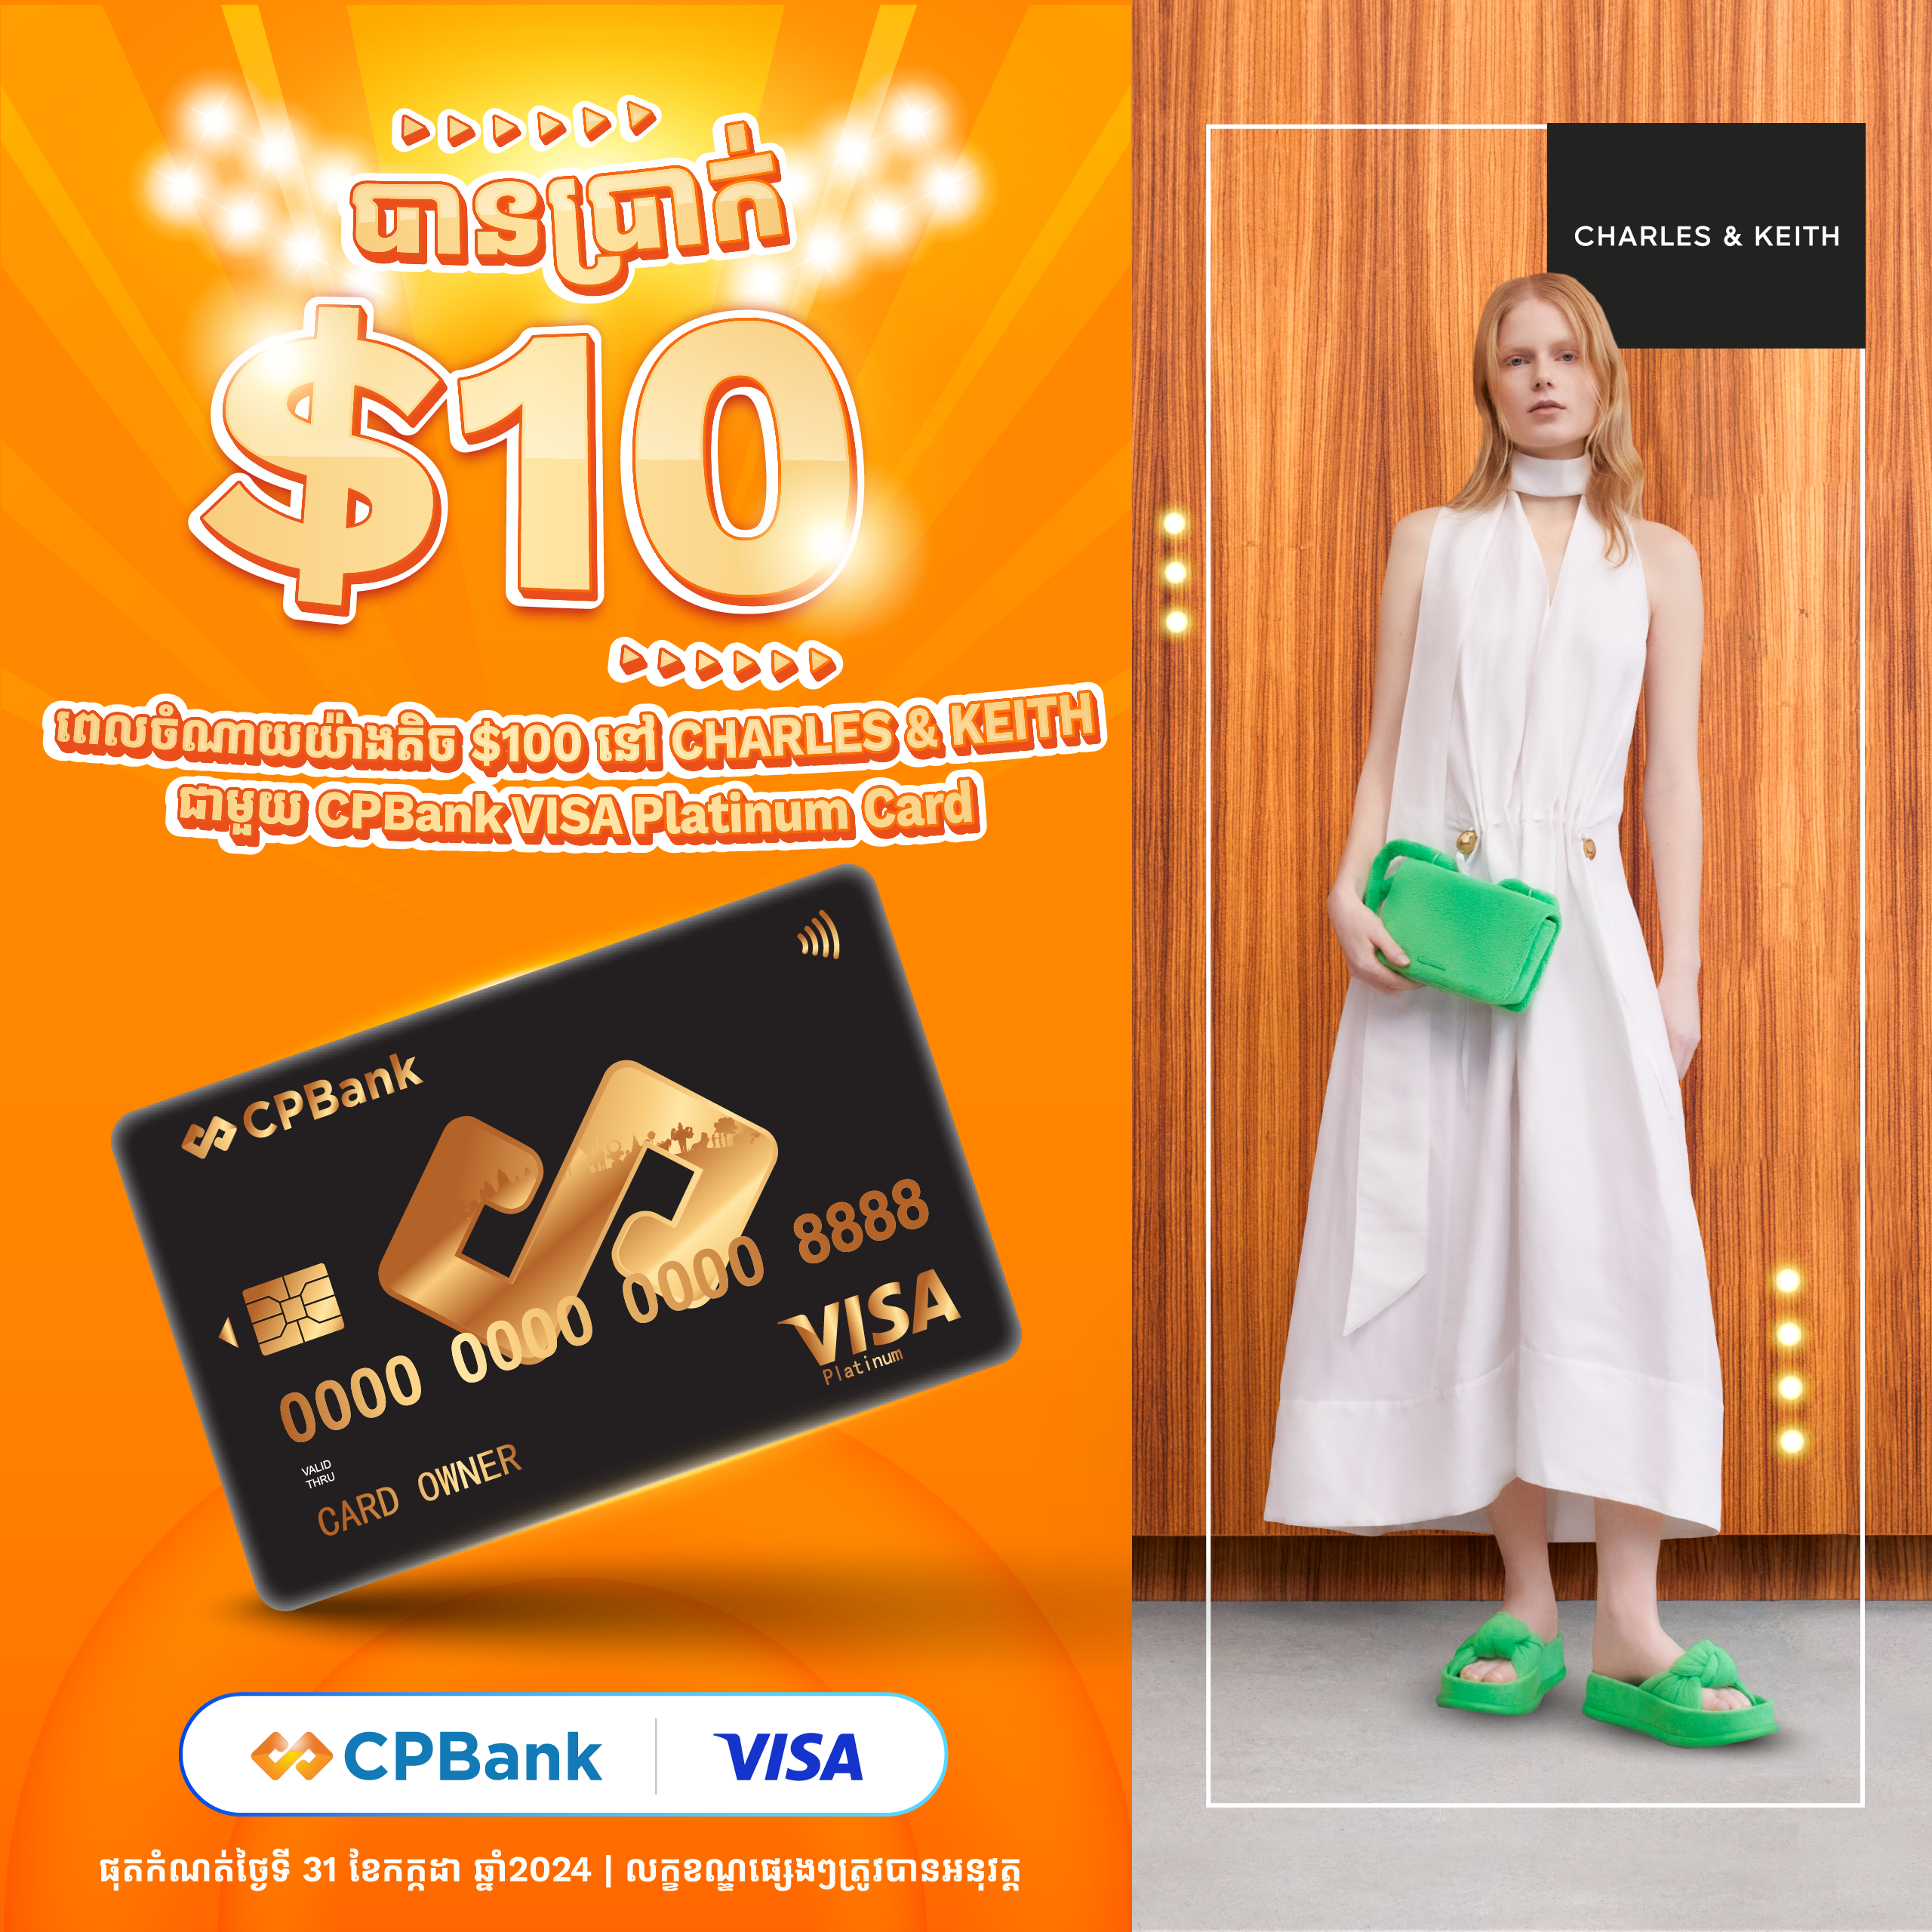 Get $10 off from CHARLES & KEITH with CPBank VISA Platinum Cards